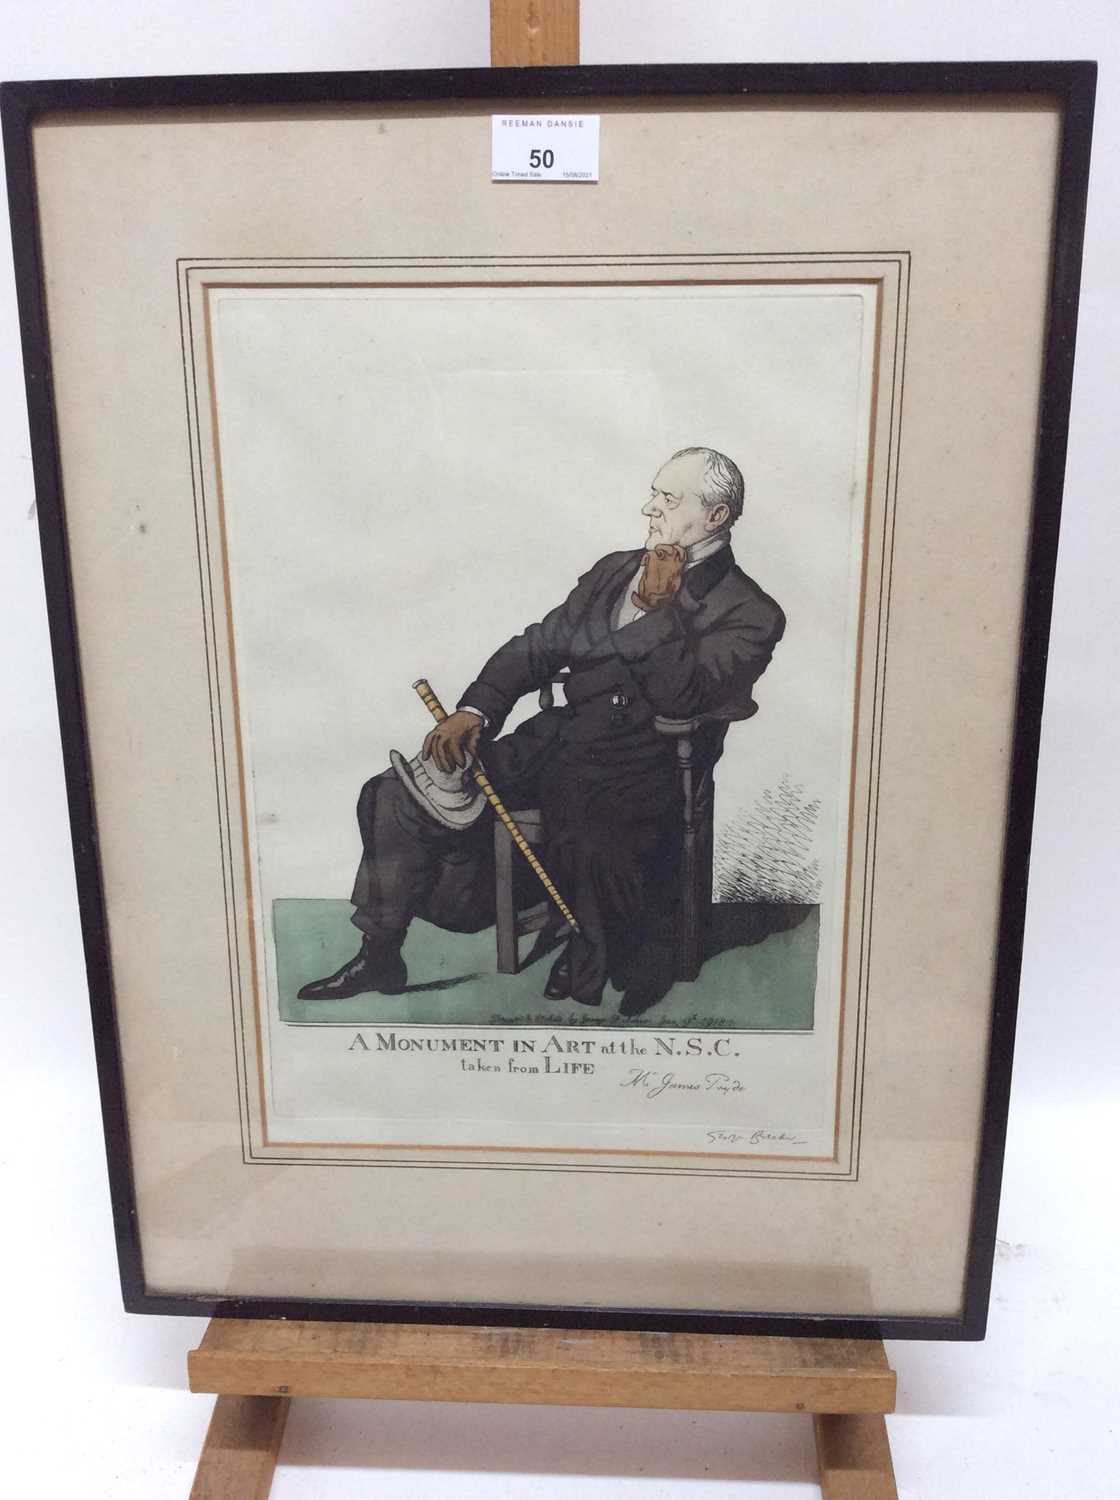 Lot 50 - George Belcher (1875-1947) signed coloured etching - 'A Monument In Art at the N.S.C. Taken from Life Mr James Pryde', published January 9th 1918, 35cm x 25cm, in glazed frame